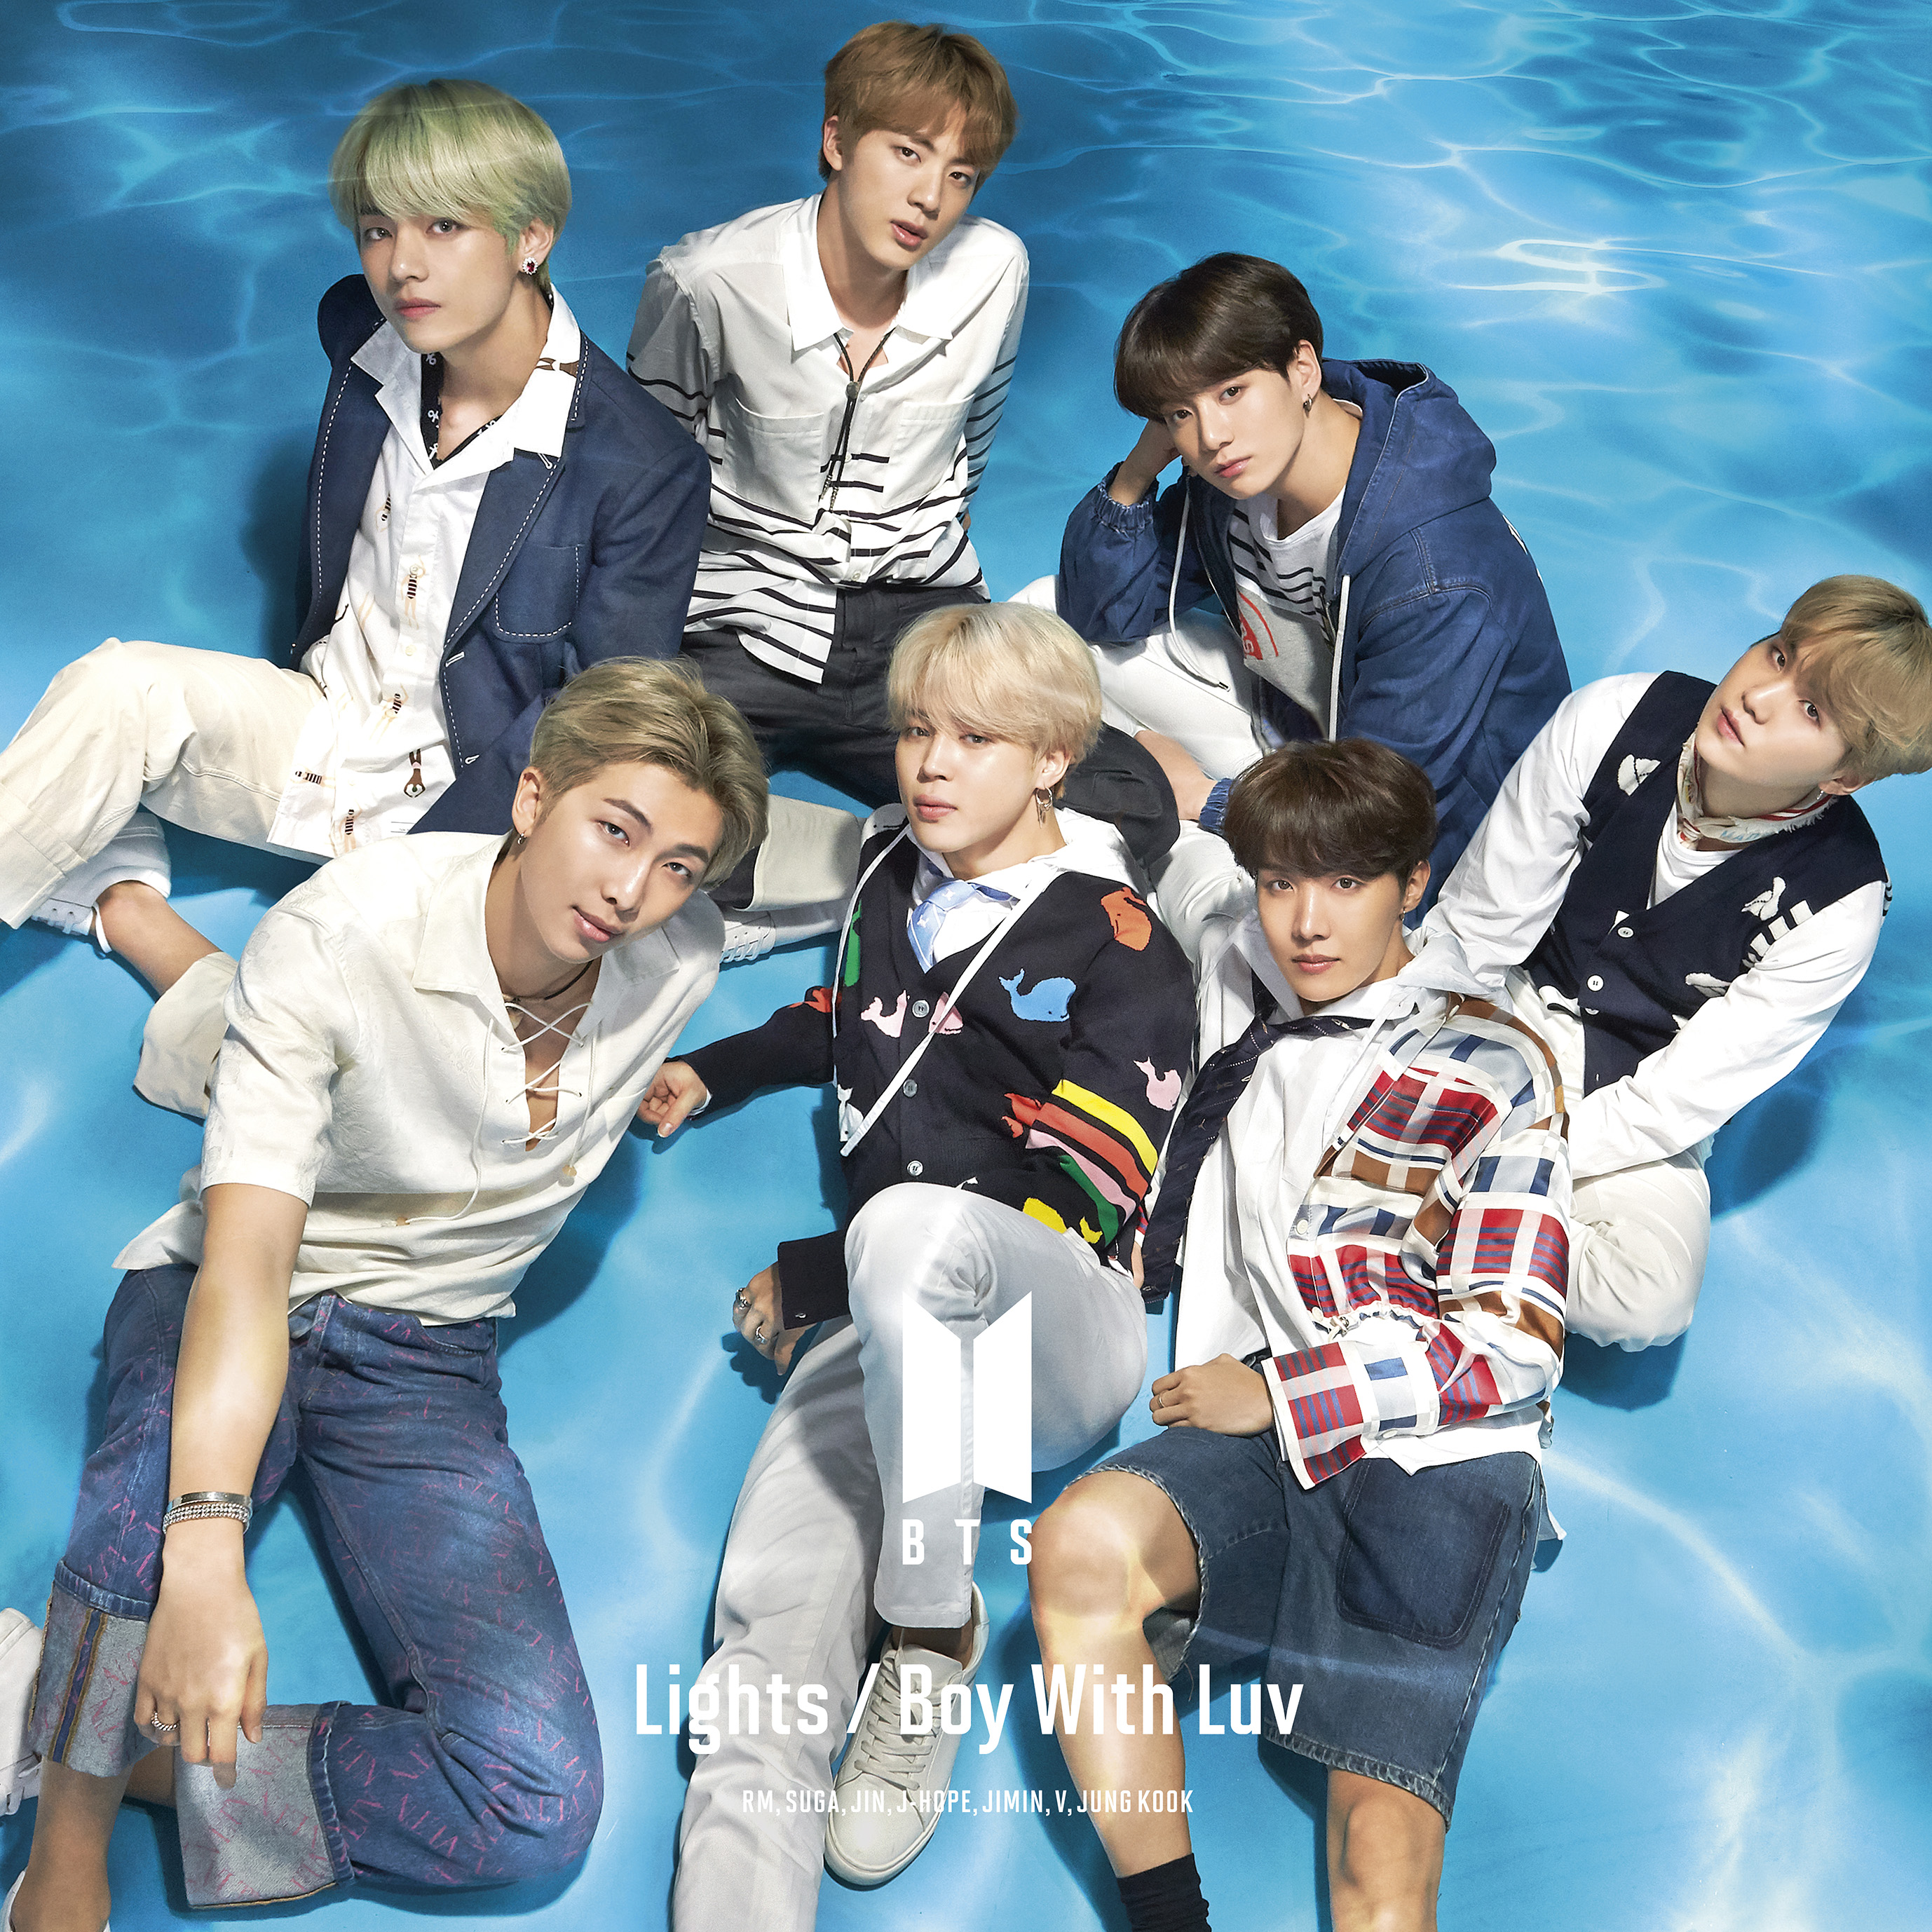 Lights Boy With Luv Cd Maxi Dvd Bts Universal Music Store